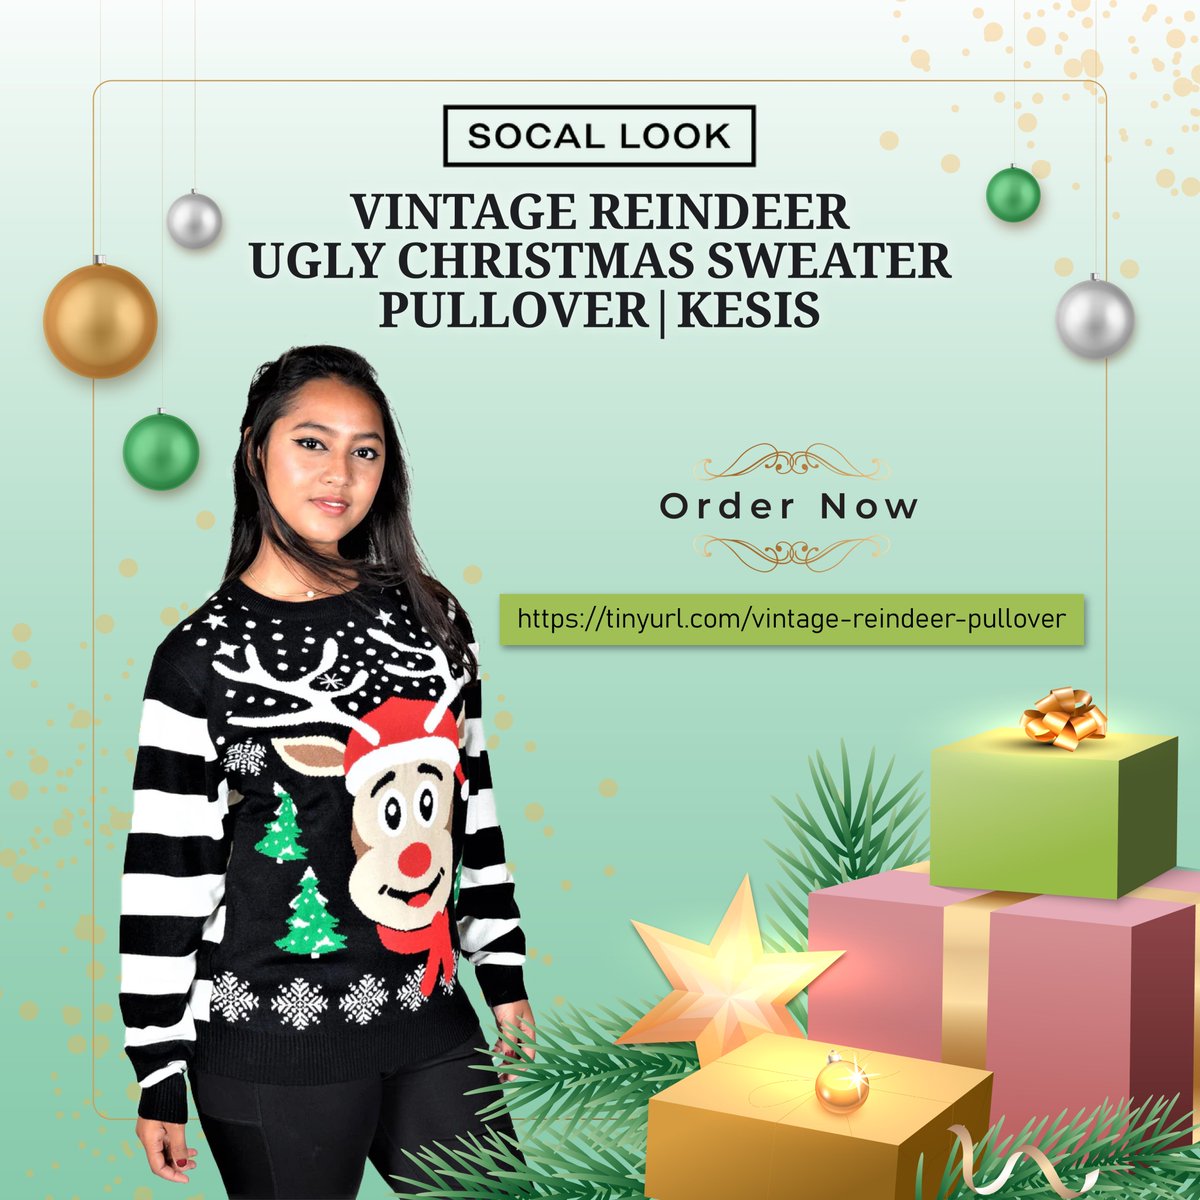 Get Cozy in Style with our Vintage Reindeer Ugly Christmas Sweater Pullover! 🦌🎄 #UglyChristmasSweater #VintageHolidayFashion #ReindeerMagic #kesis tinyurl.com/vintage-reinde…